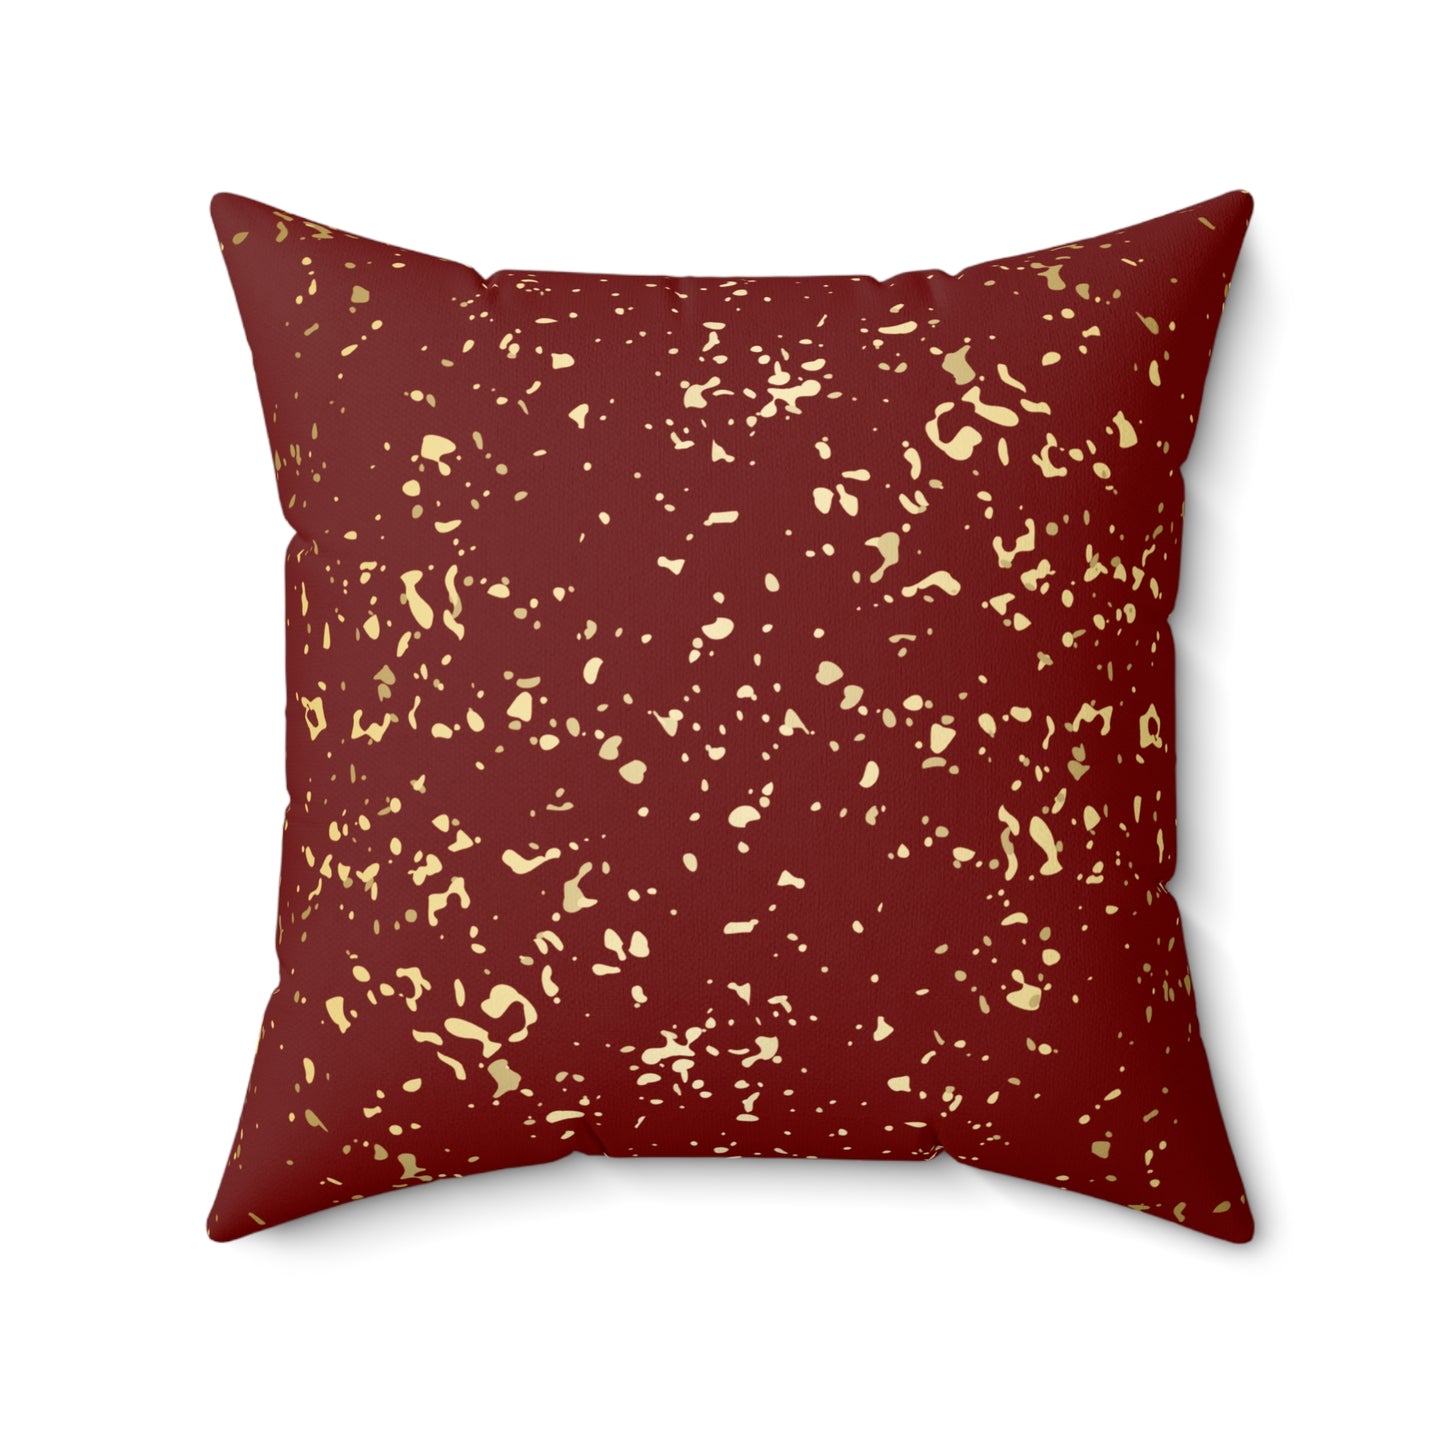 Maroon and Gold Flakes Throw Pillow